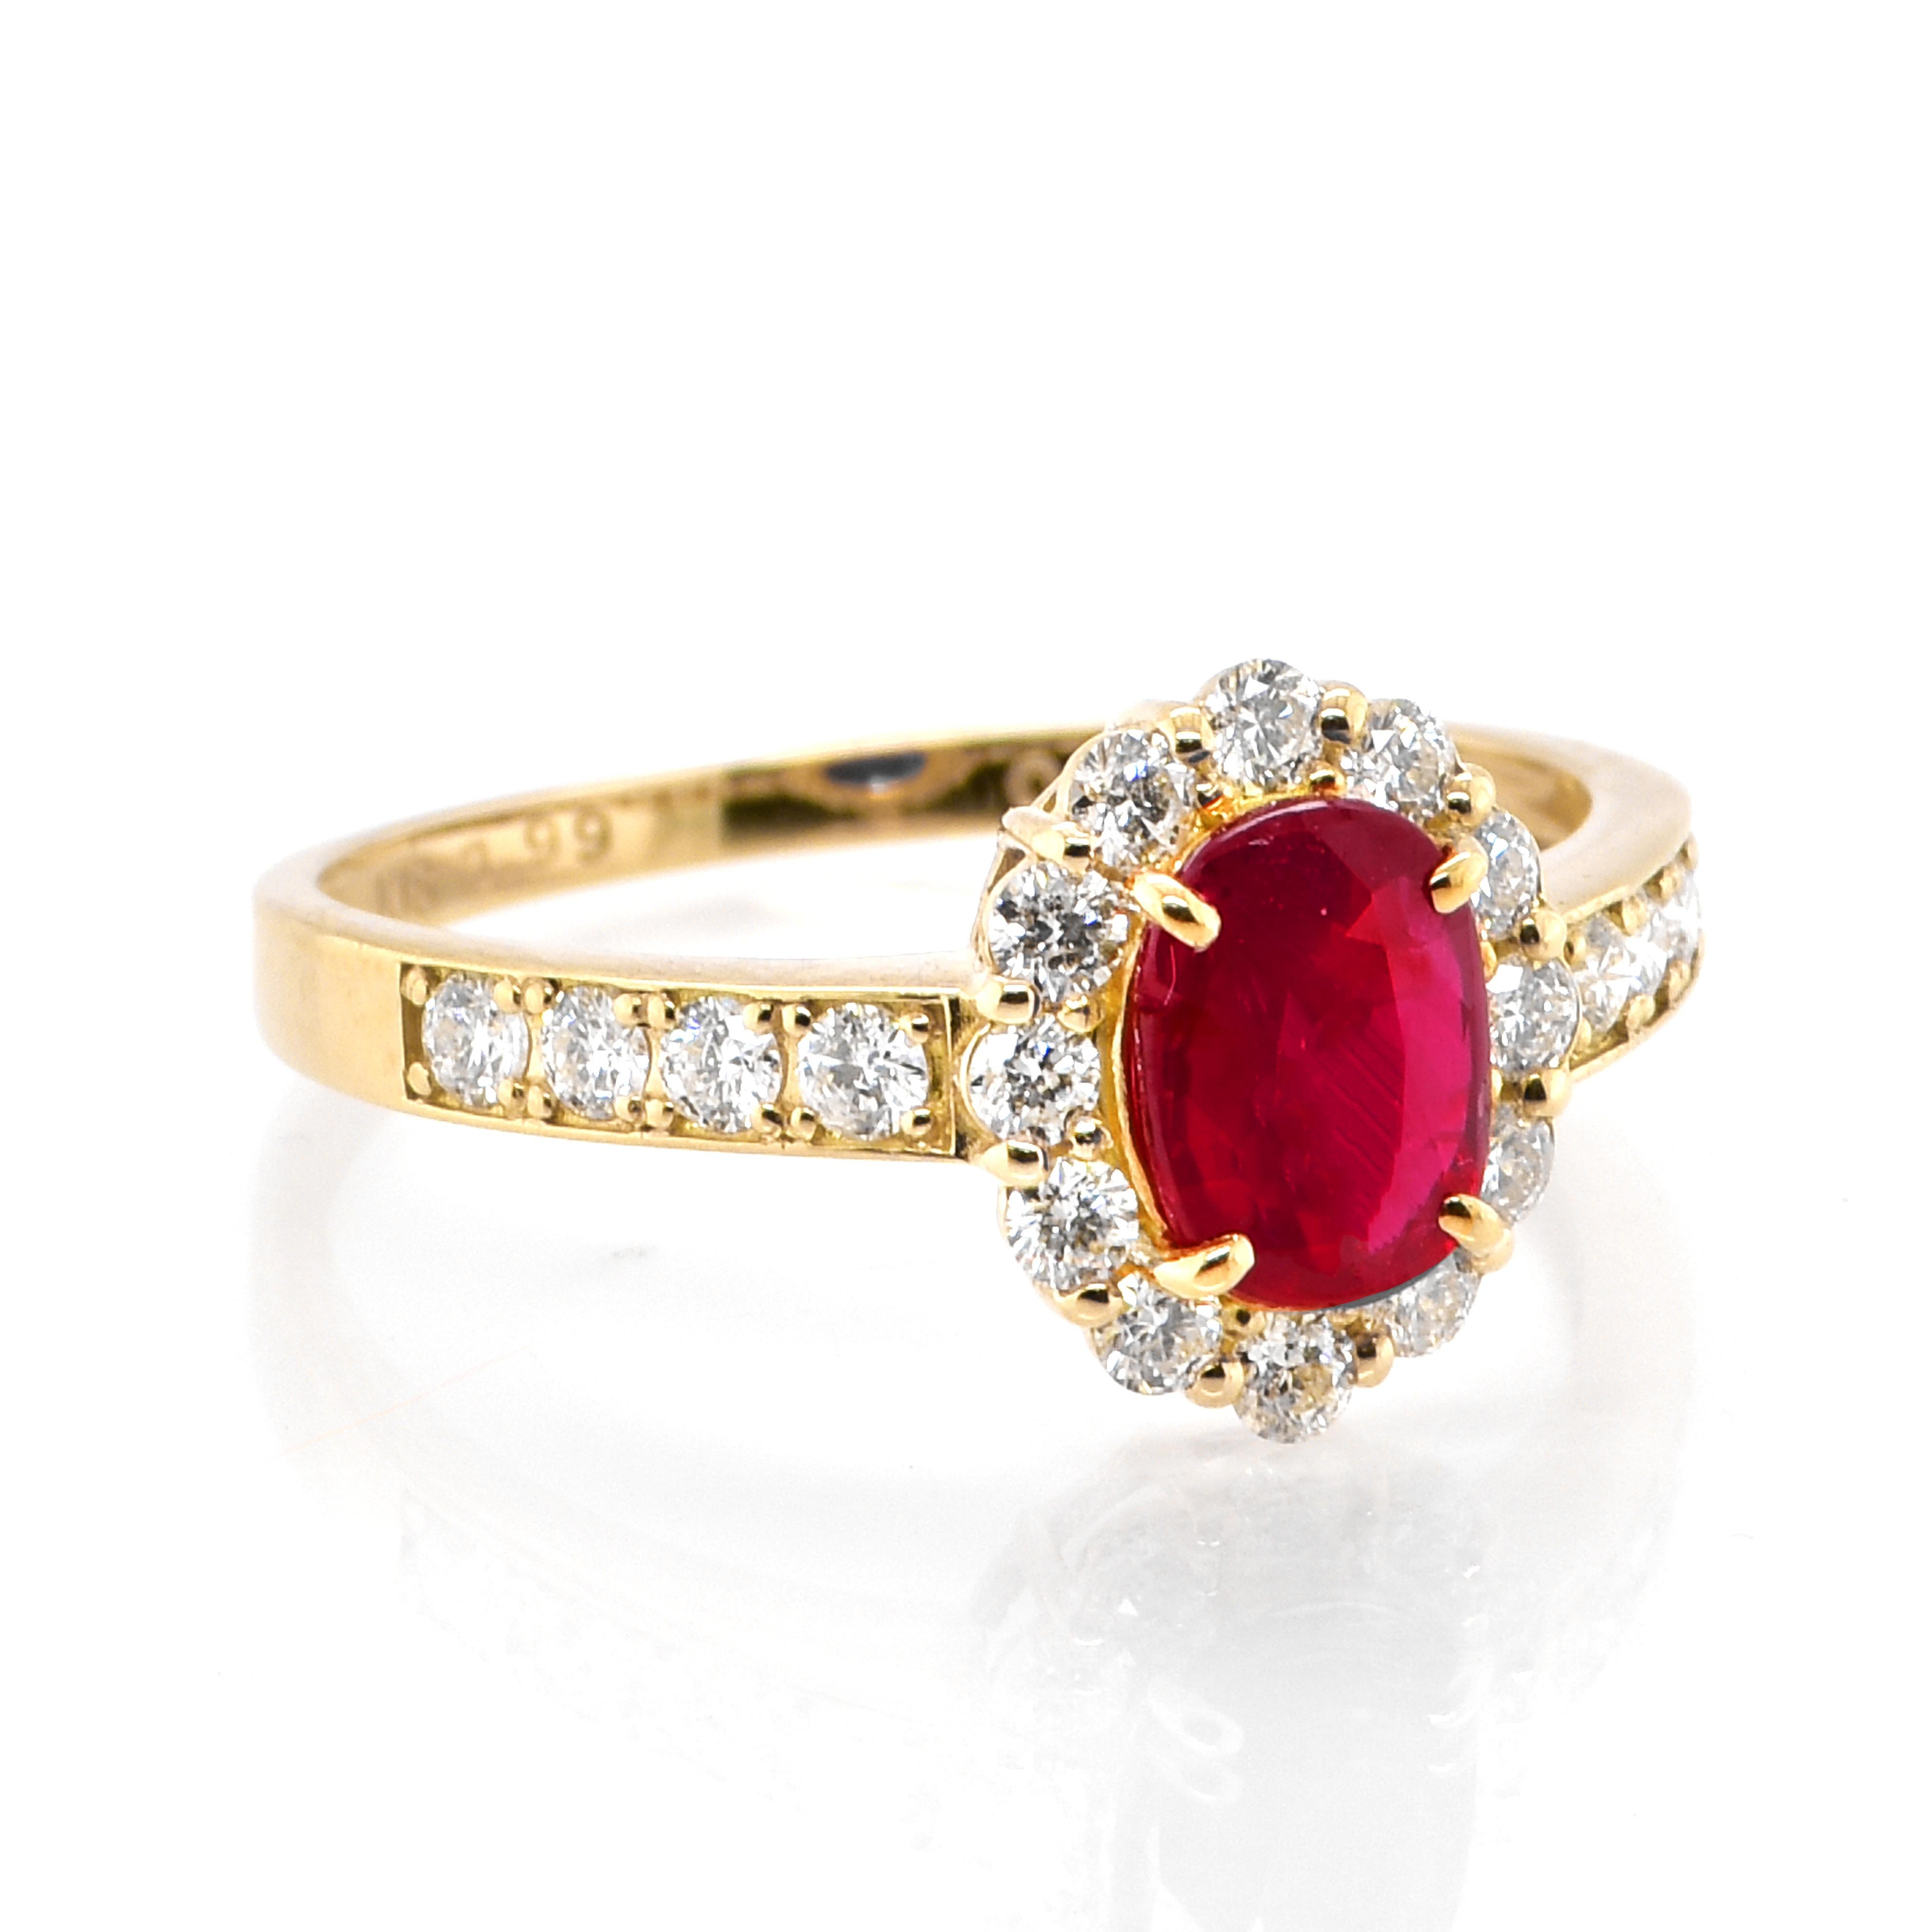 Oval Cut 0.99 Carat, Pigeon Blood Red, Untreated Ruby and Diamond Ring Made in Platinum For Sale